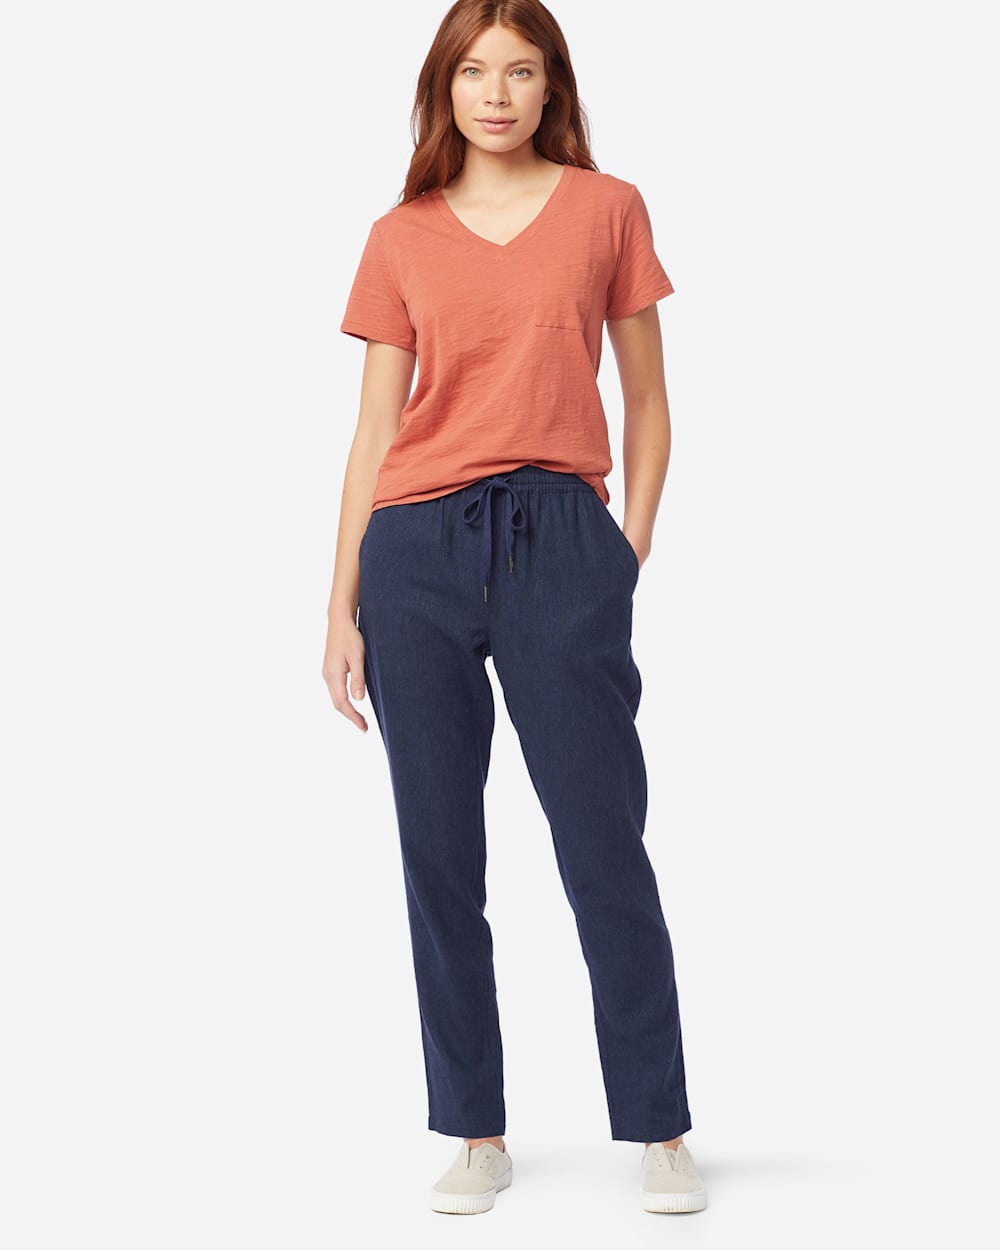 ALTERNATE VIEW OF WOMEN'S WASHED LINEN PANTS IN NAVY MIX image number 3